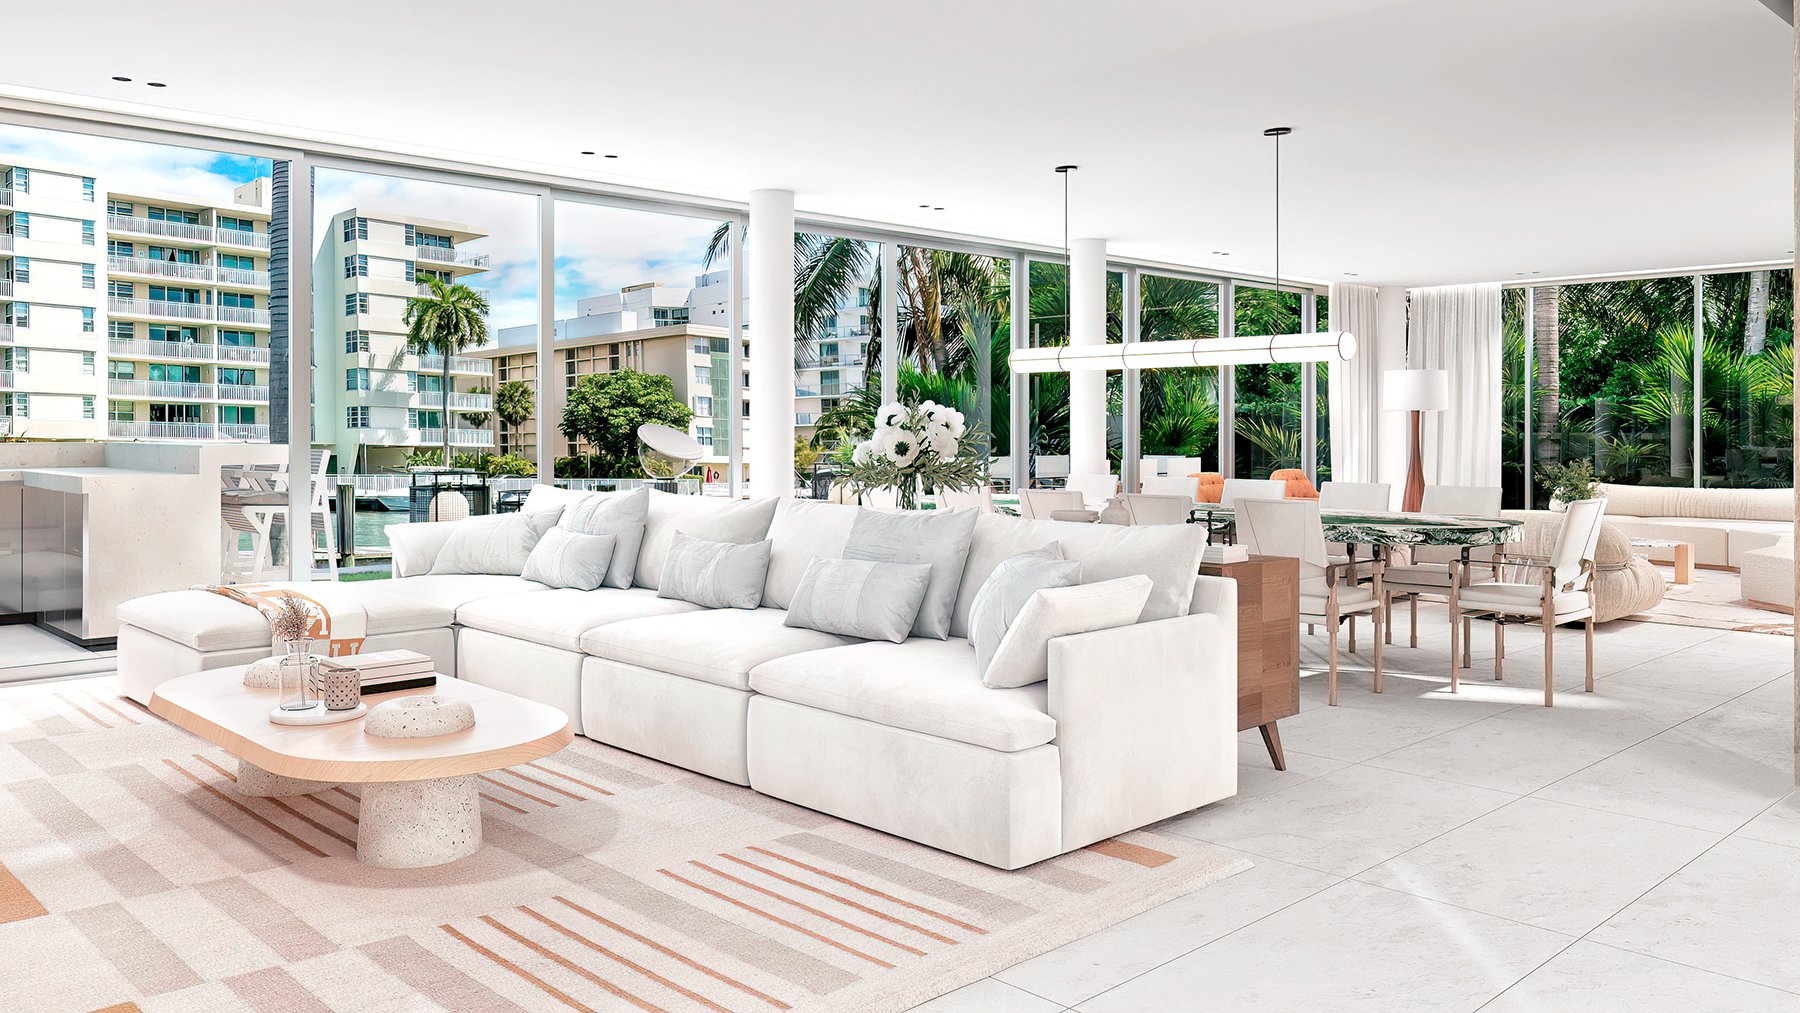 Off-Market Spec Home Sells For Record Price On East Side of Miami's Bay Harbor Islands 8.jpg